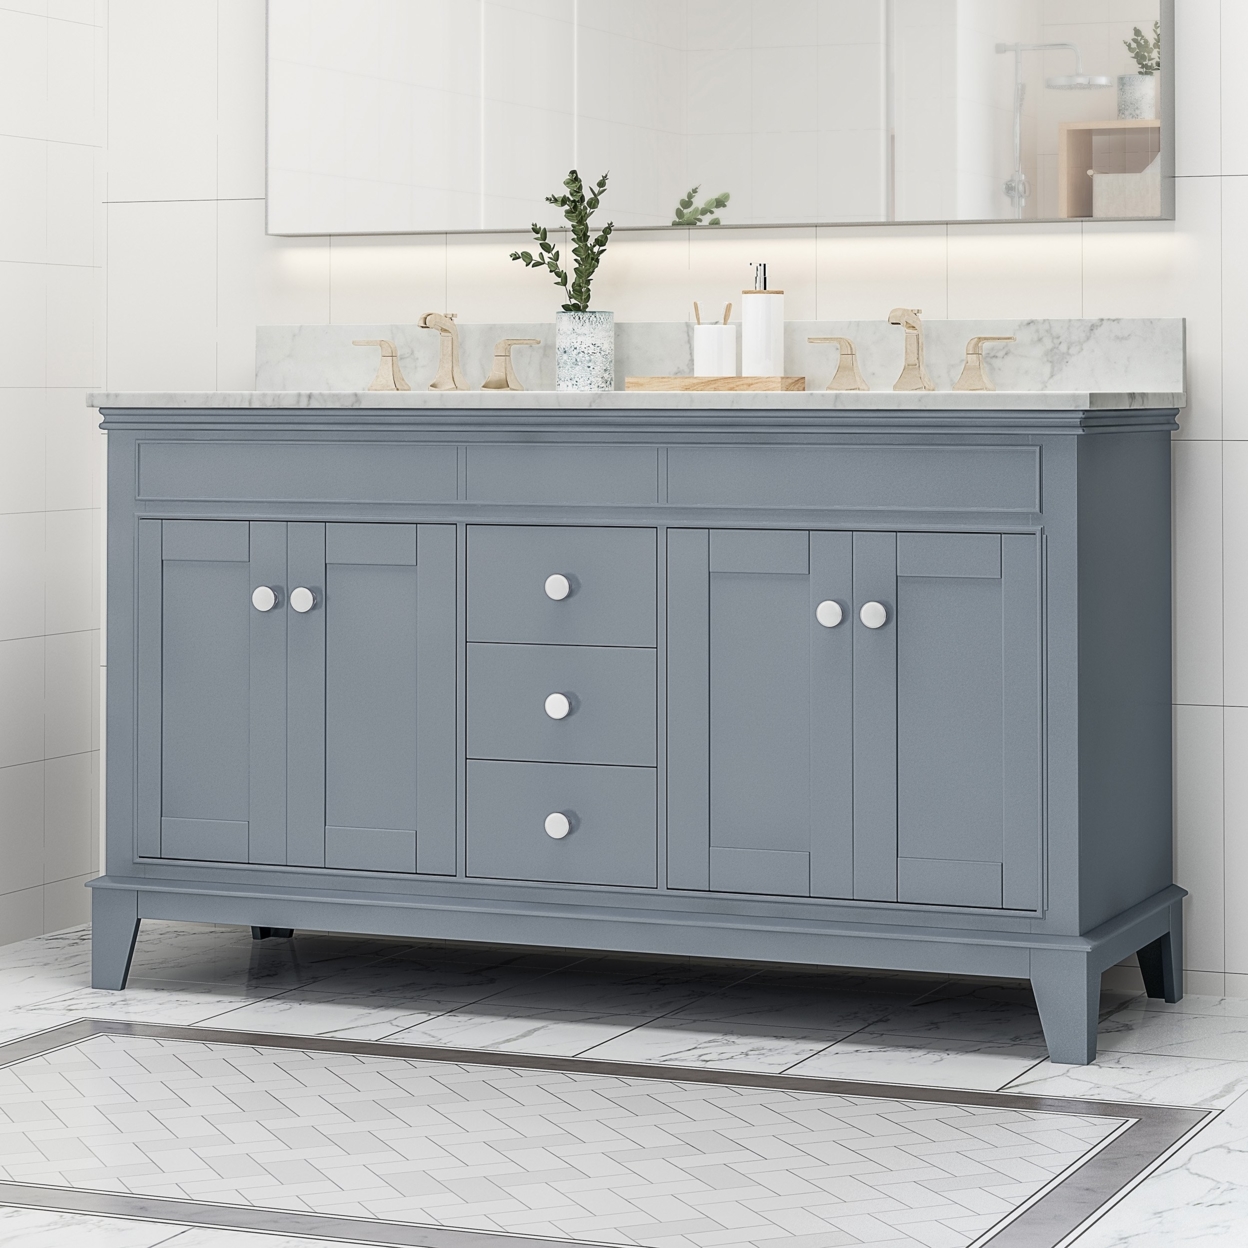 Feldspar Contemporary 60 Wood Bathroom Vanity (Counter Top Not Included) - White